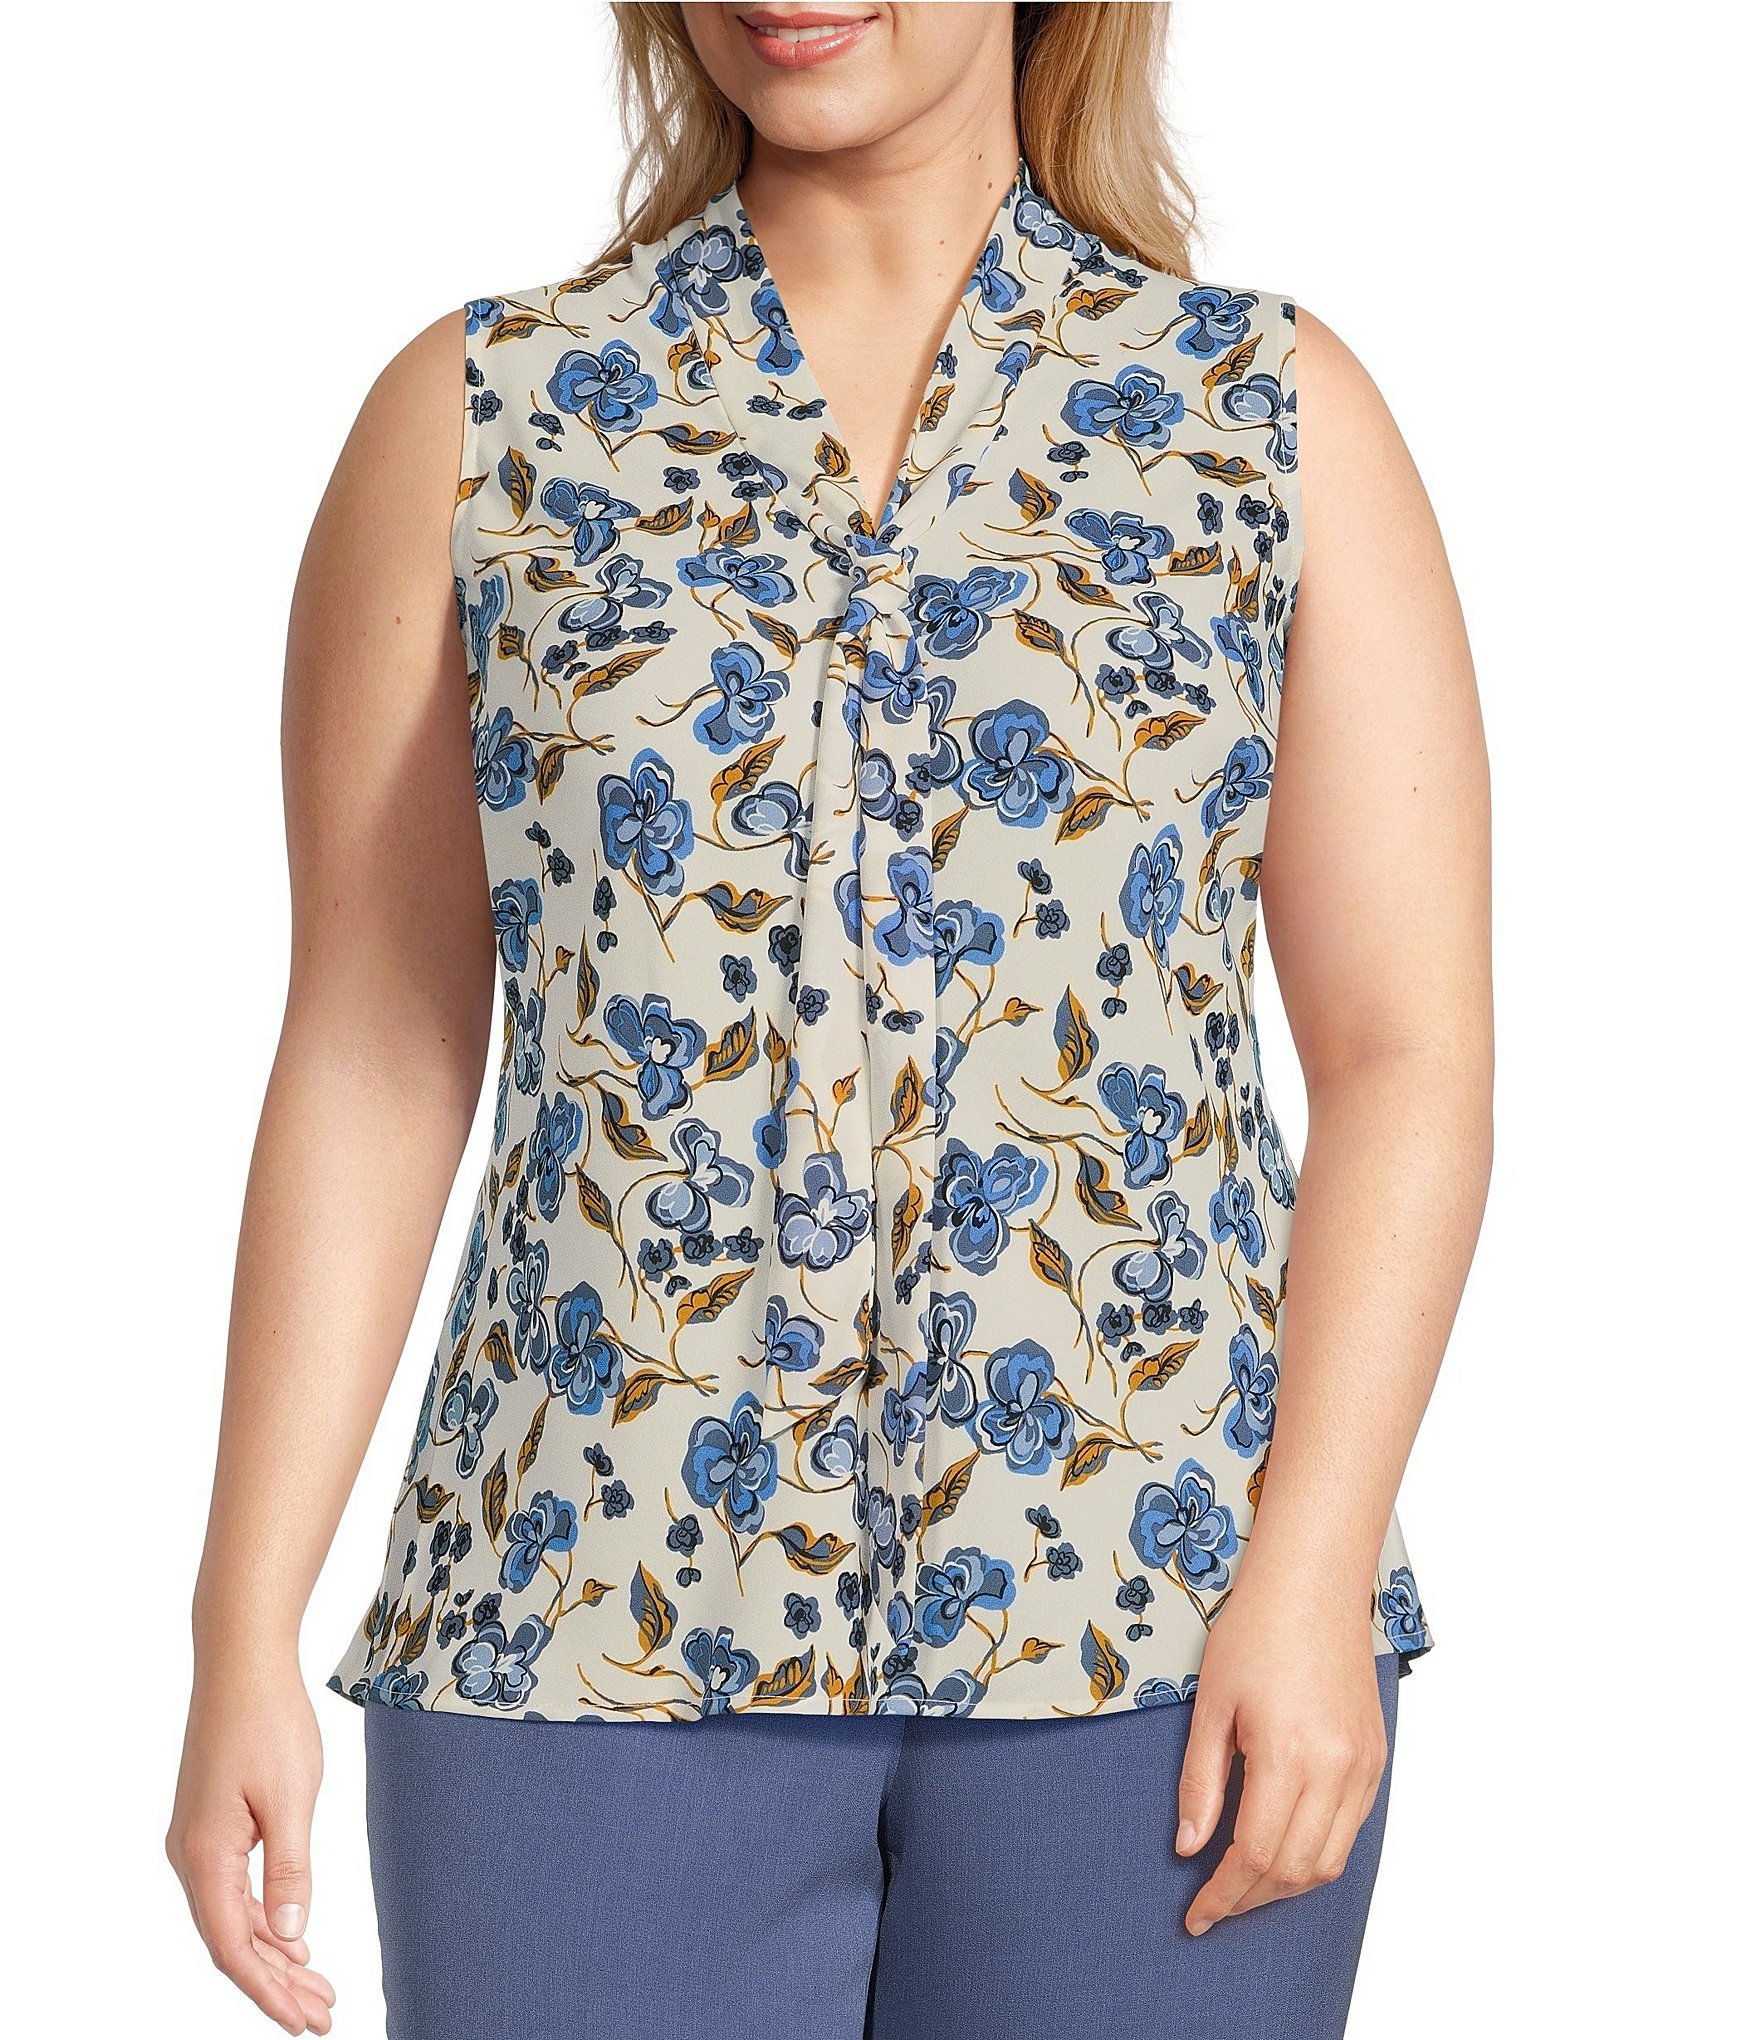 Lucky Brand Color Block Floral Blue Sleeveless Top Size 3X (Plus